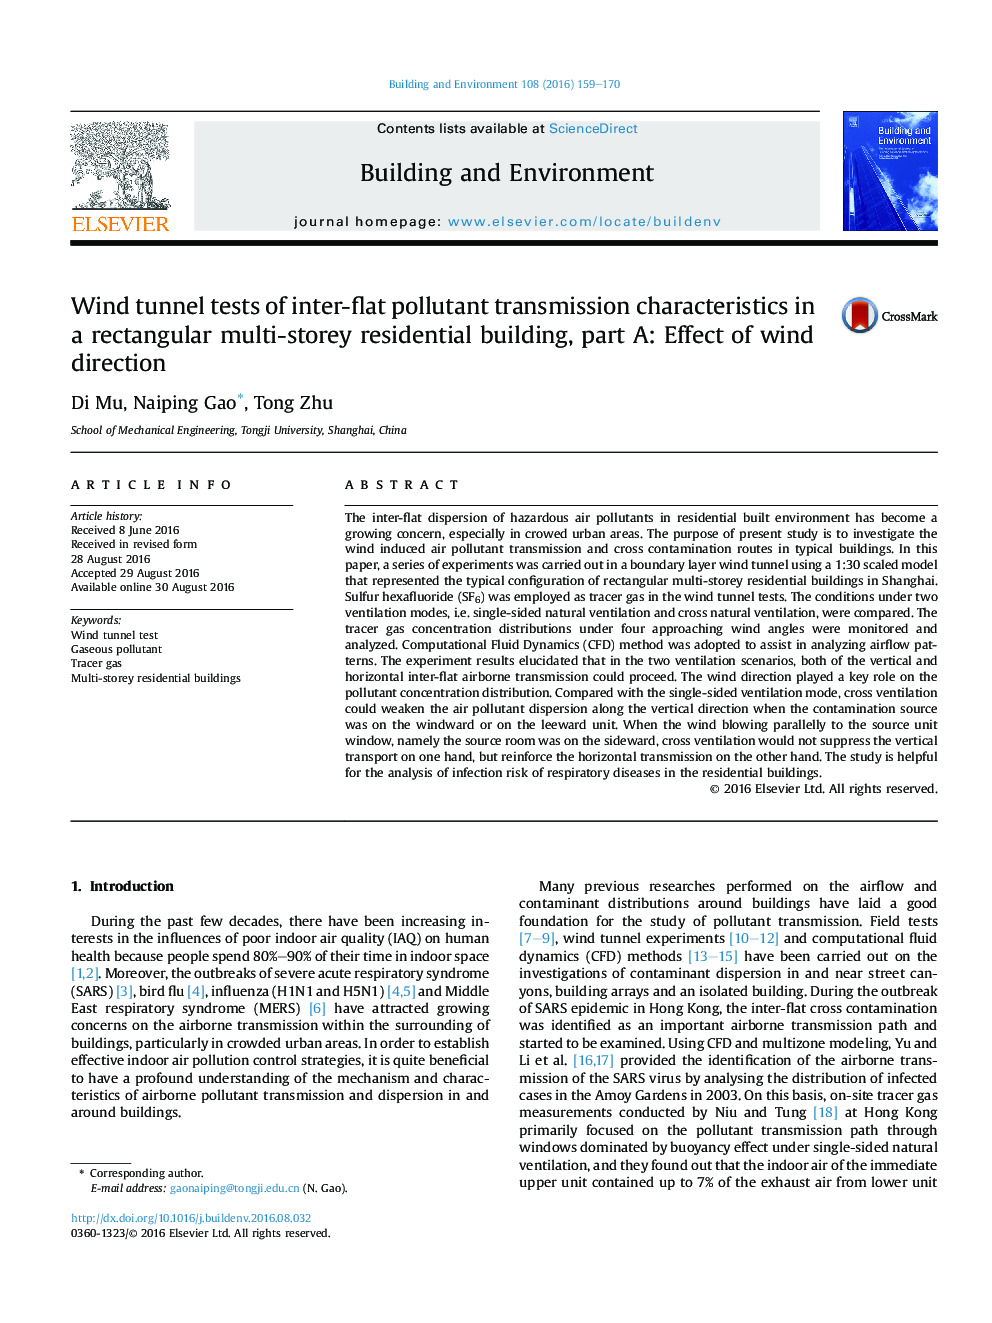 Wind tunnel tests of inter-flat pollutant transmission characteristics in a rectangular multi-storey residential building, part A: Effect of wind direction